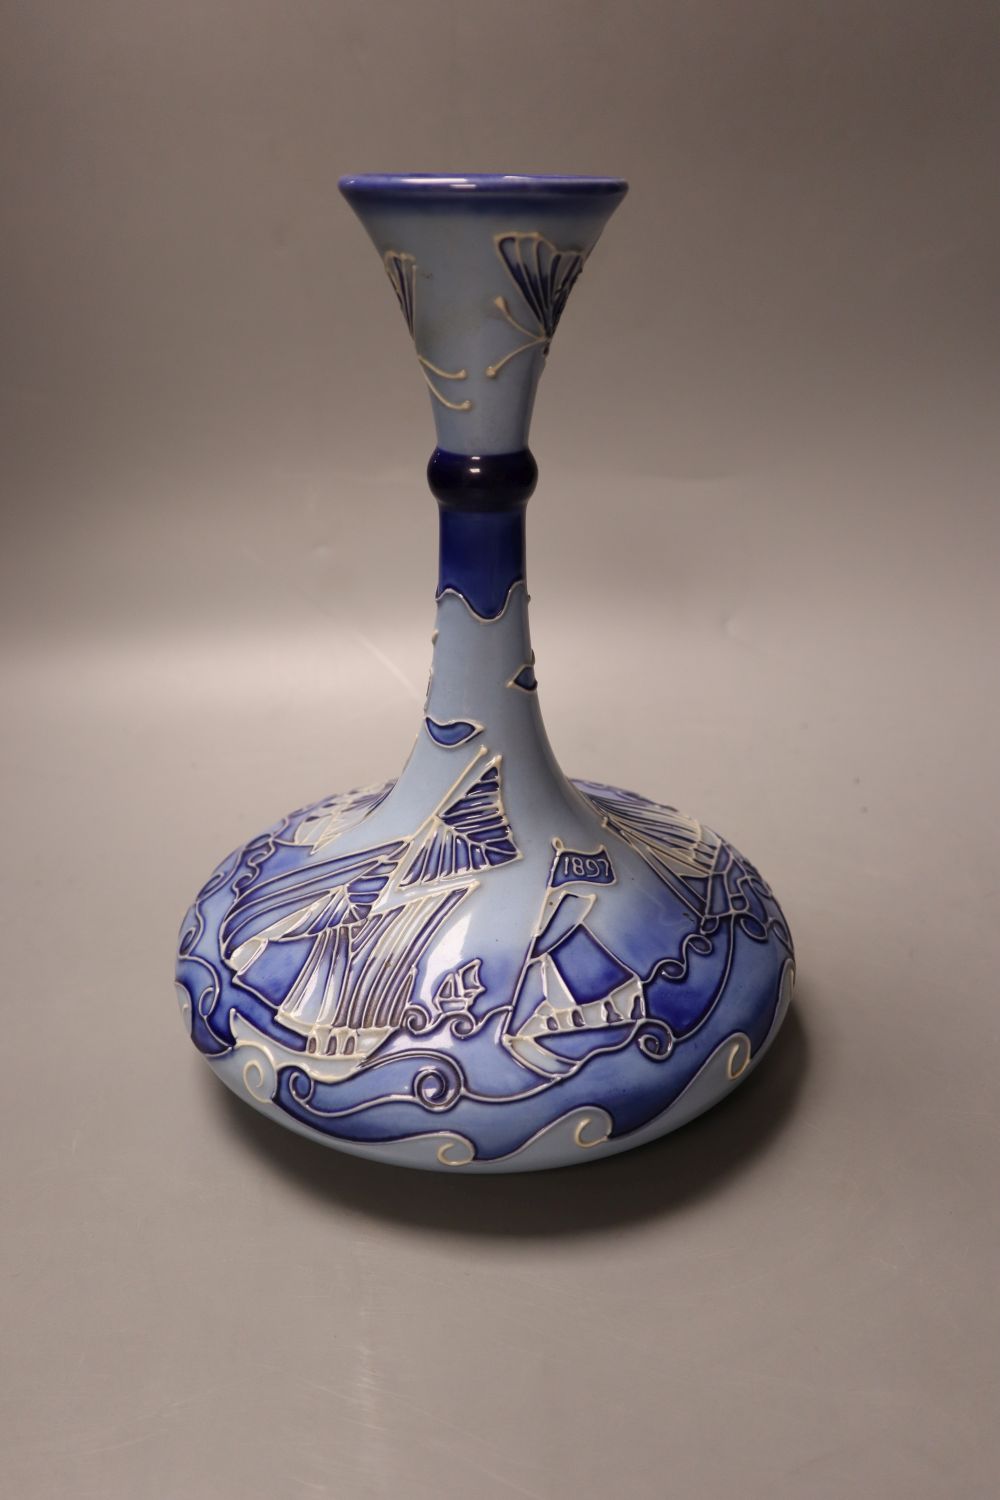 A Moorcroft vase, Love in a mist, designed by Rachel Bishop, limited edition number 61 of 300, 32cms high, together with certificat